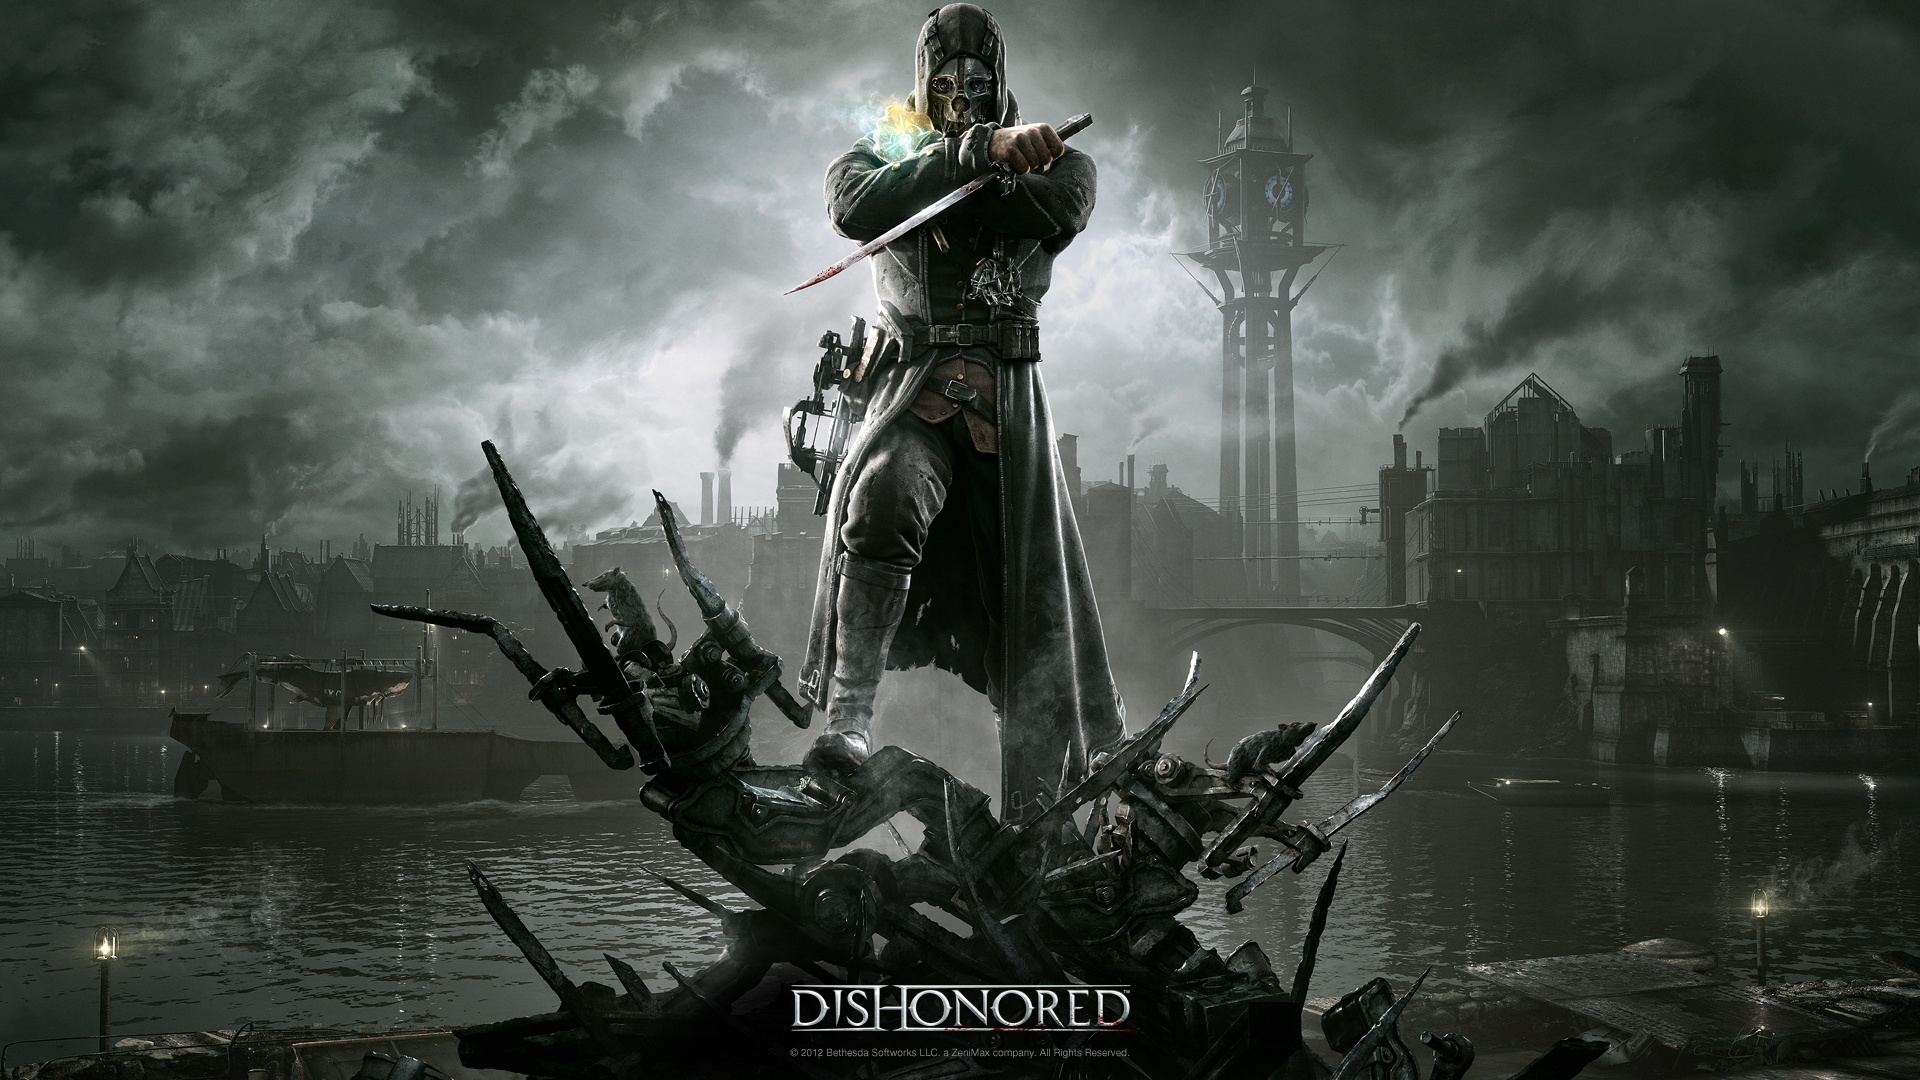 Best Dishonored Background for mobile